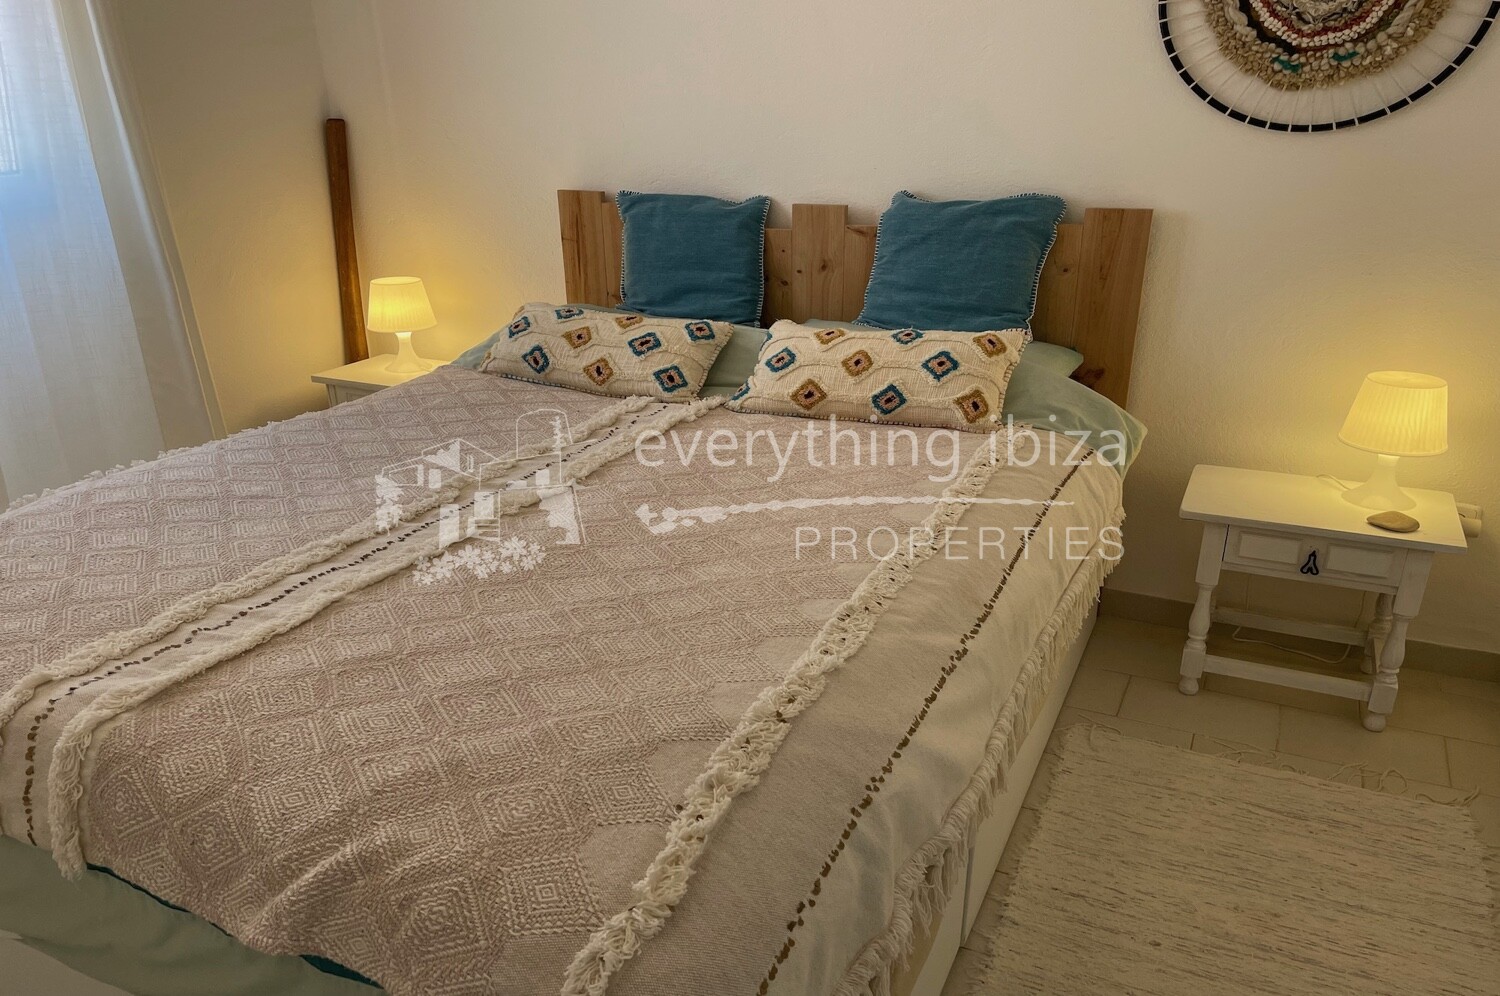 Renovated & Furnished Apartment Close to the Beach, ref. 1473, for sale in Ibiza by everything ibiza Properties